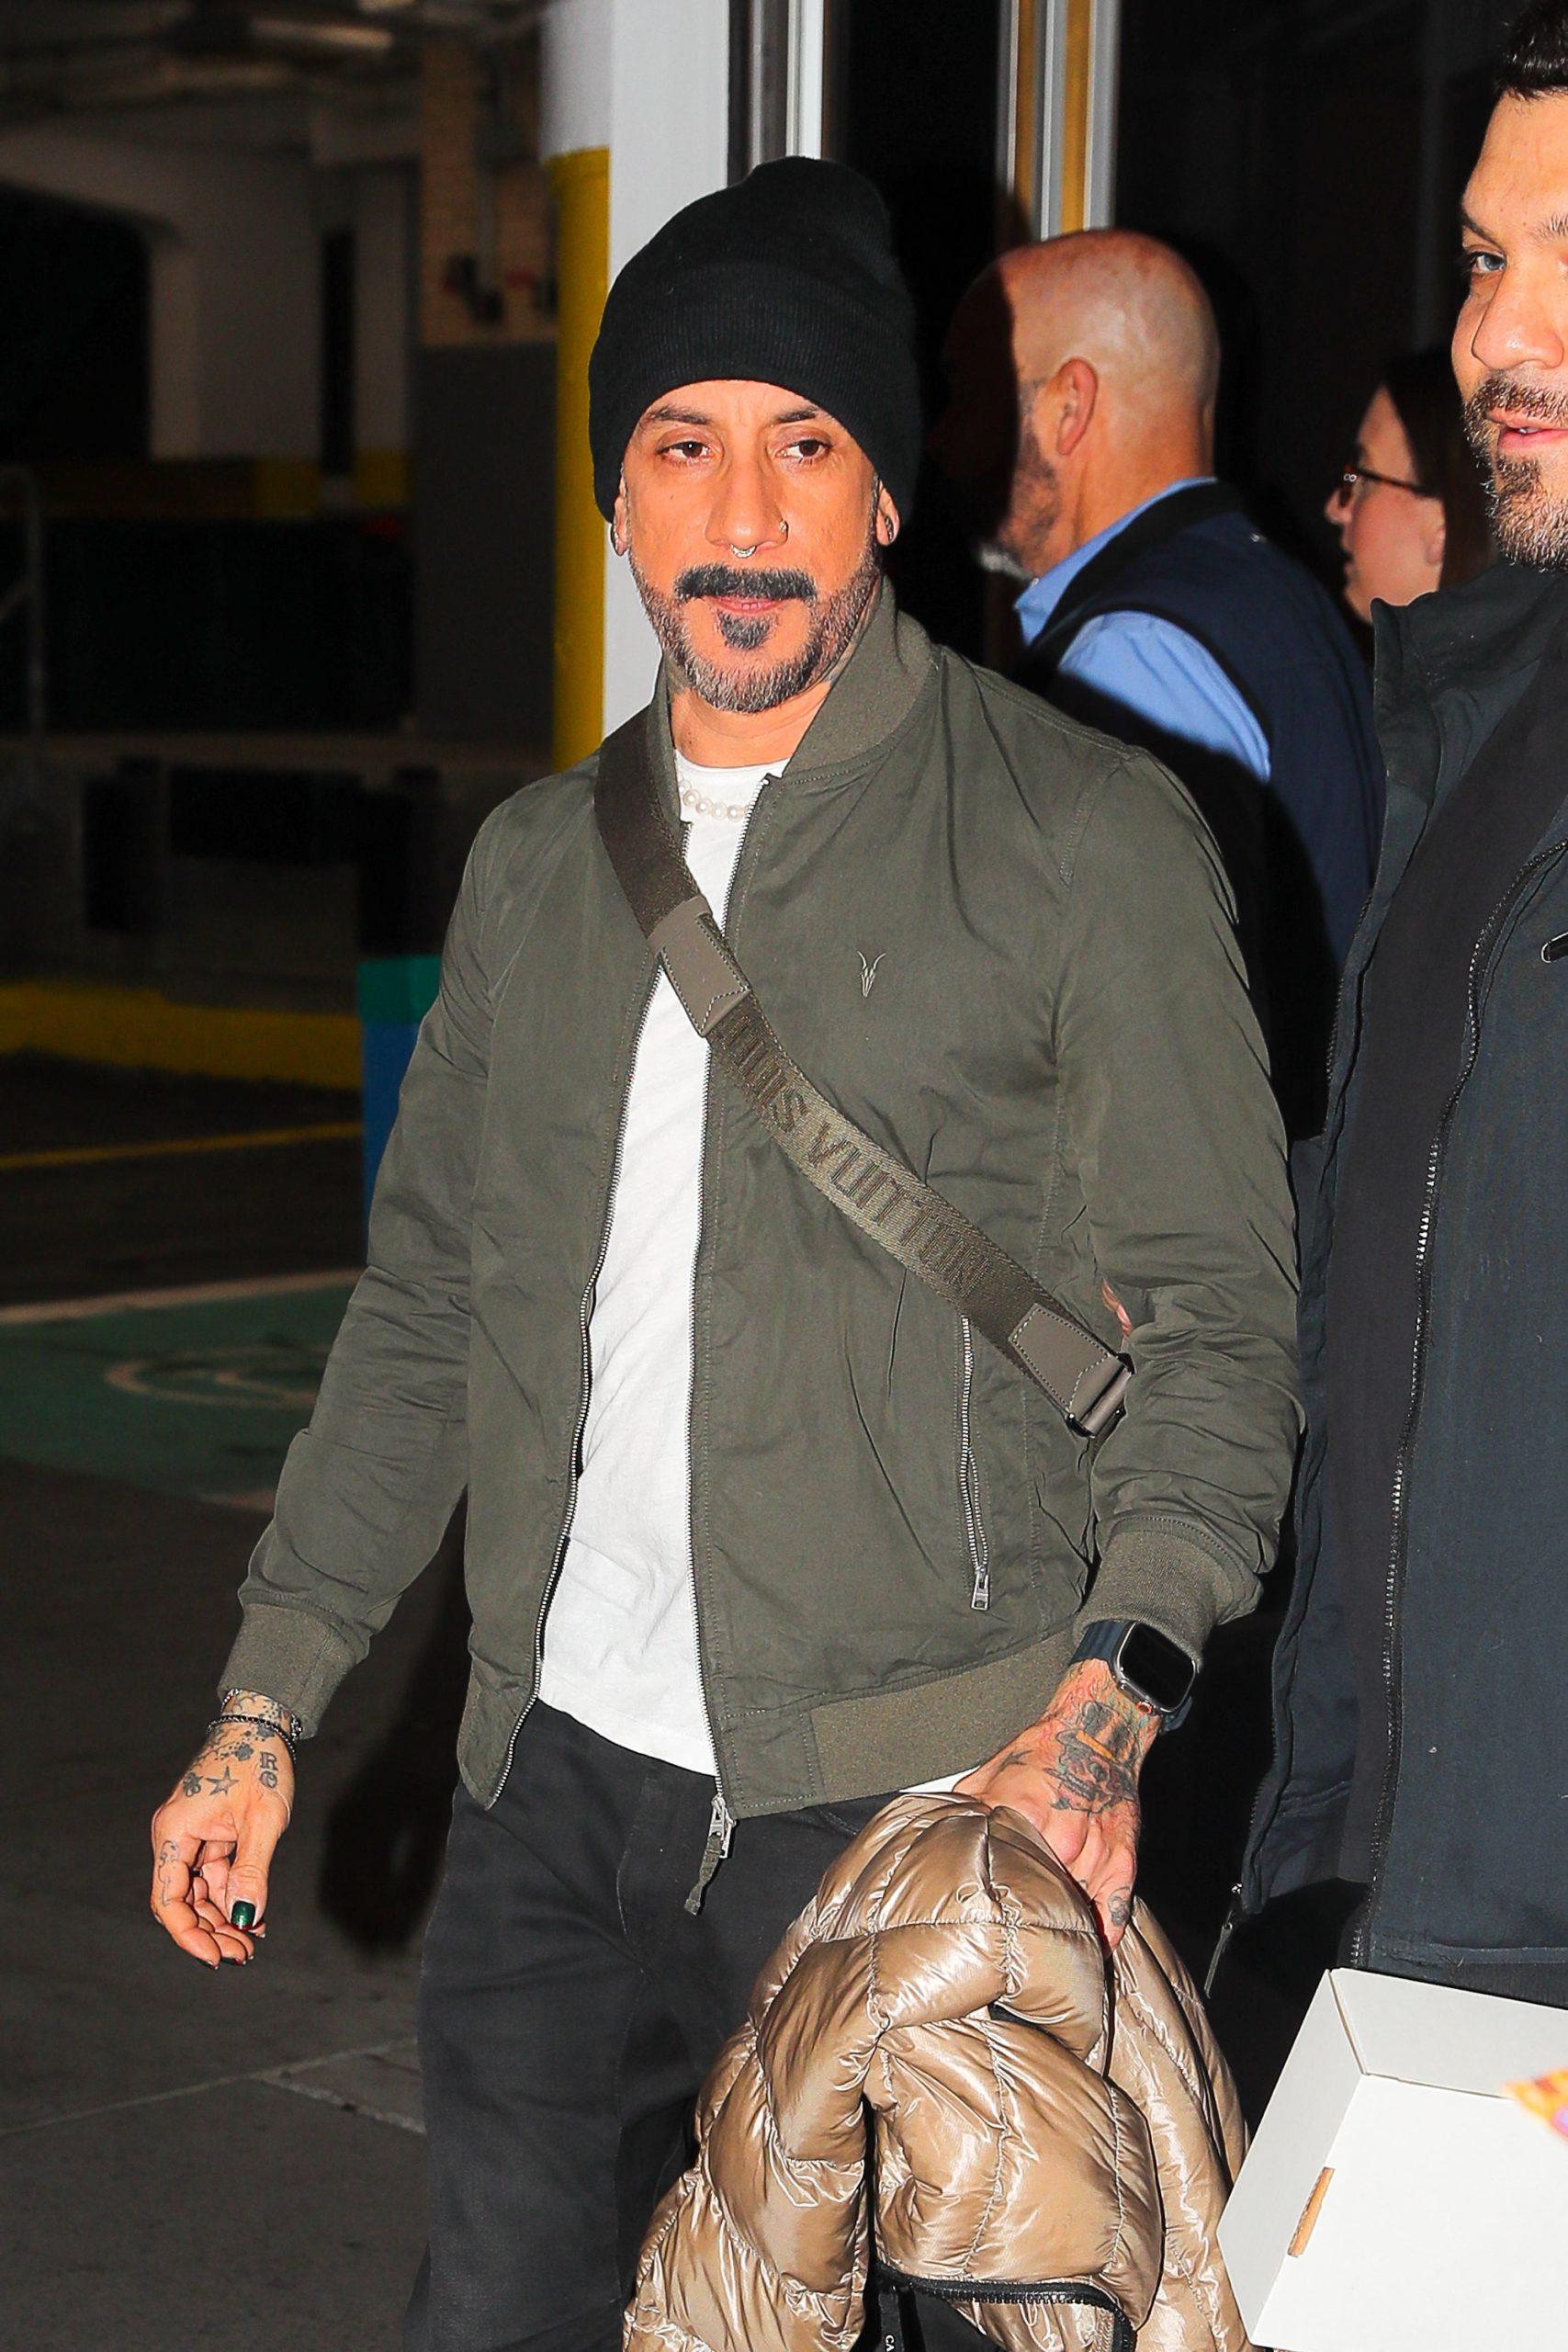 Backstreet Boys members AJ McLean, Brian Littrell, Kevin Richardson and Howie Dorough are seen leaving the Empire State Building in NYC